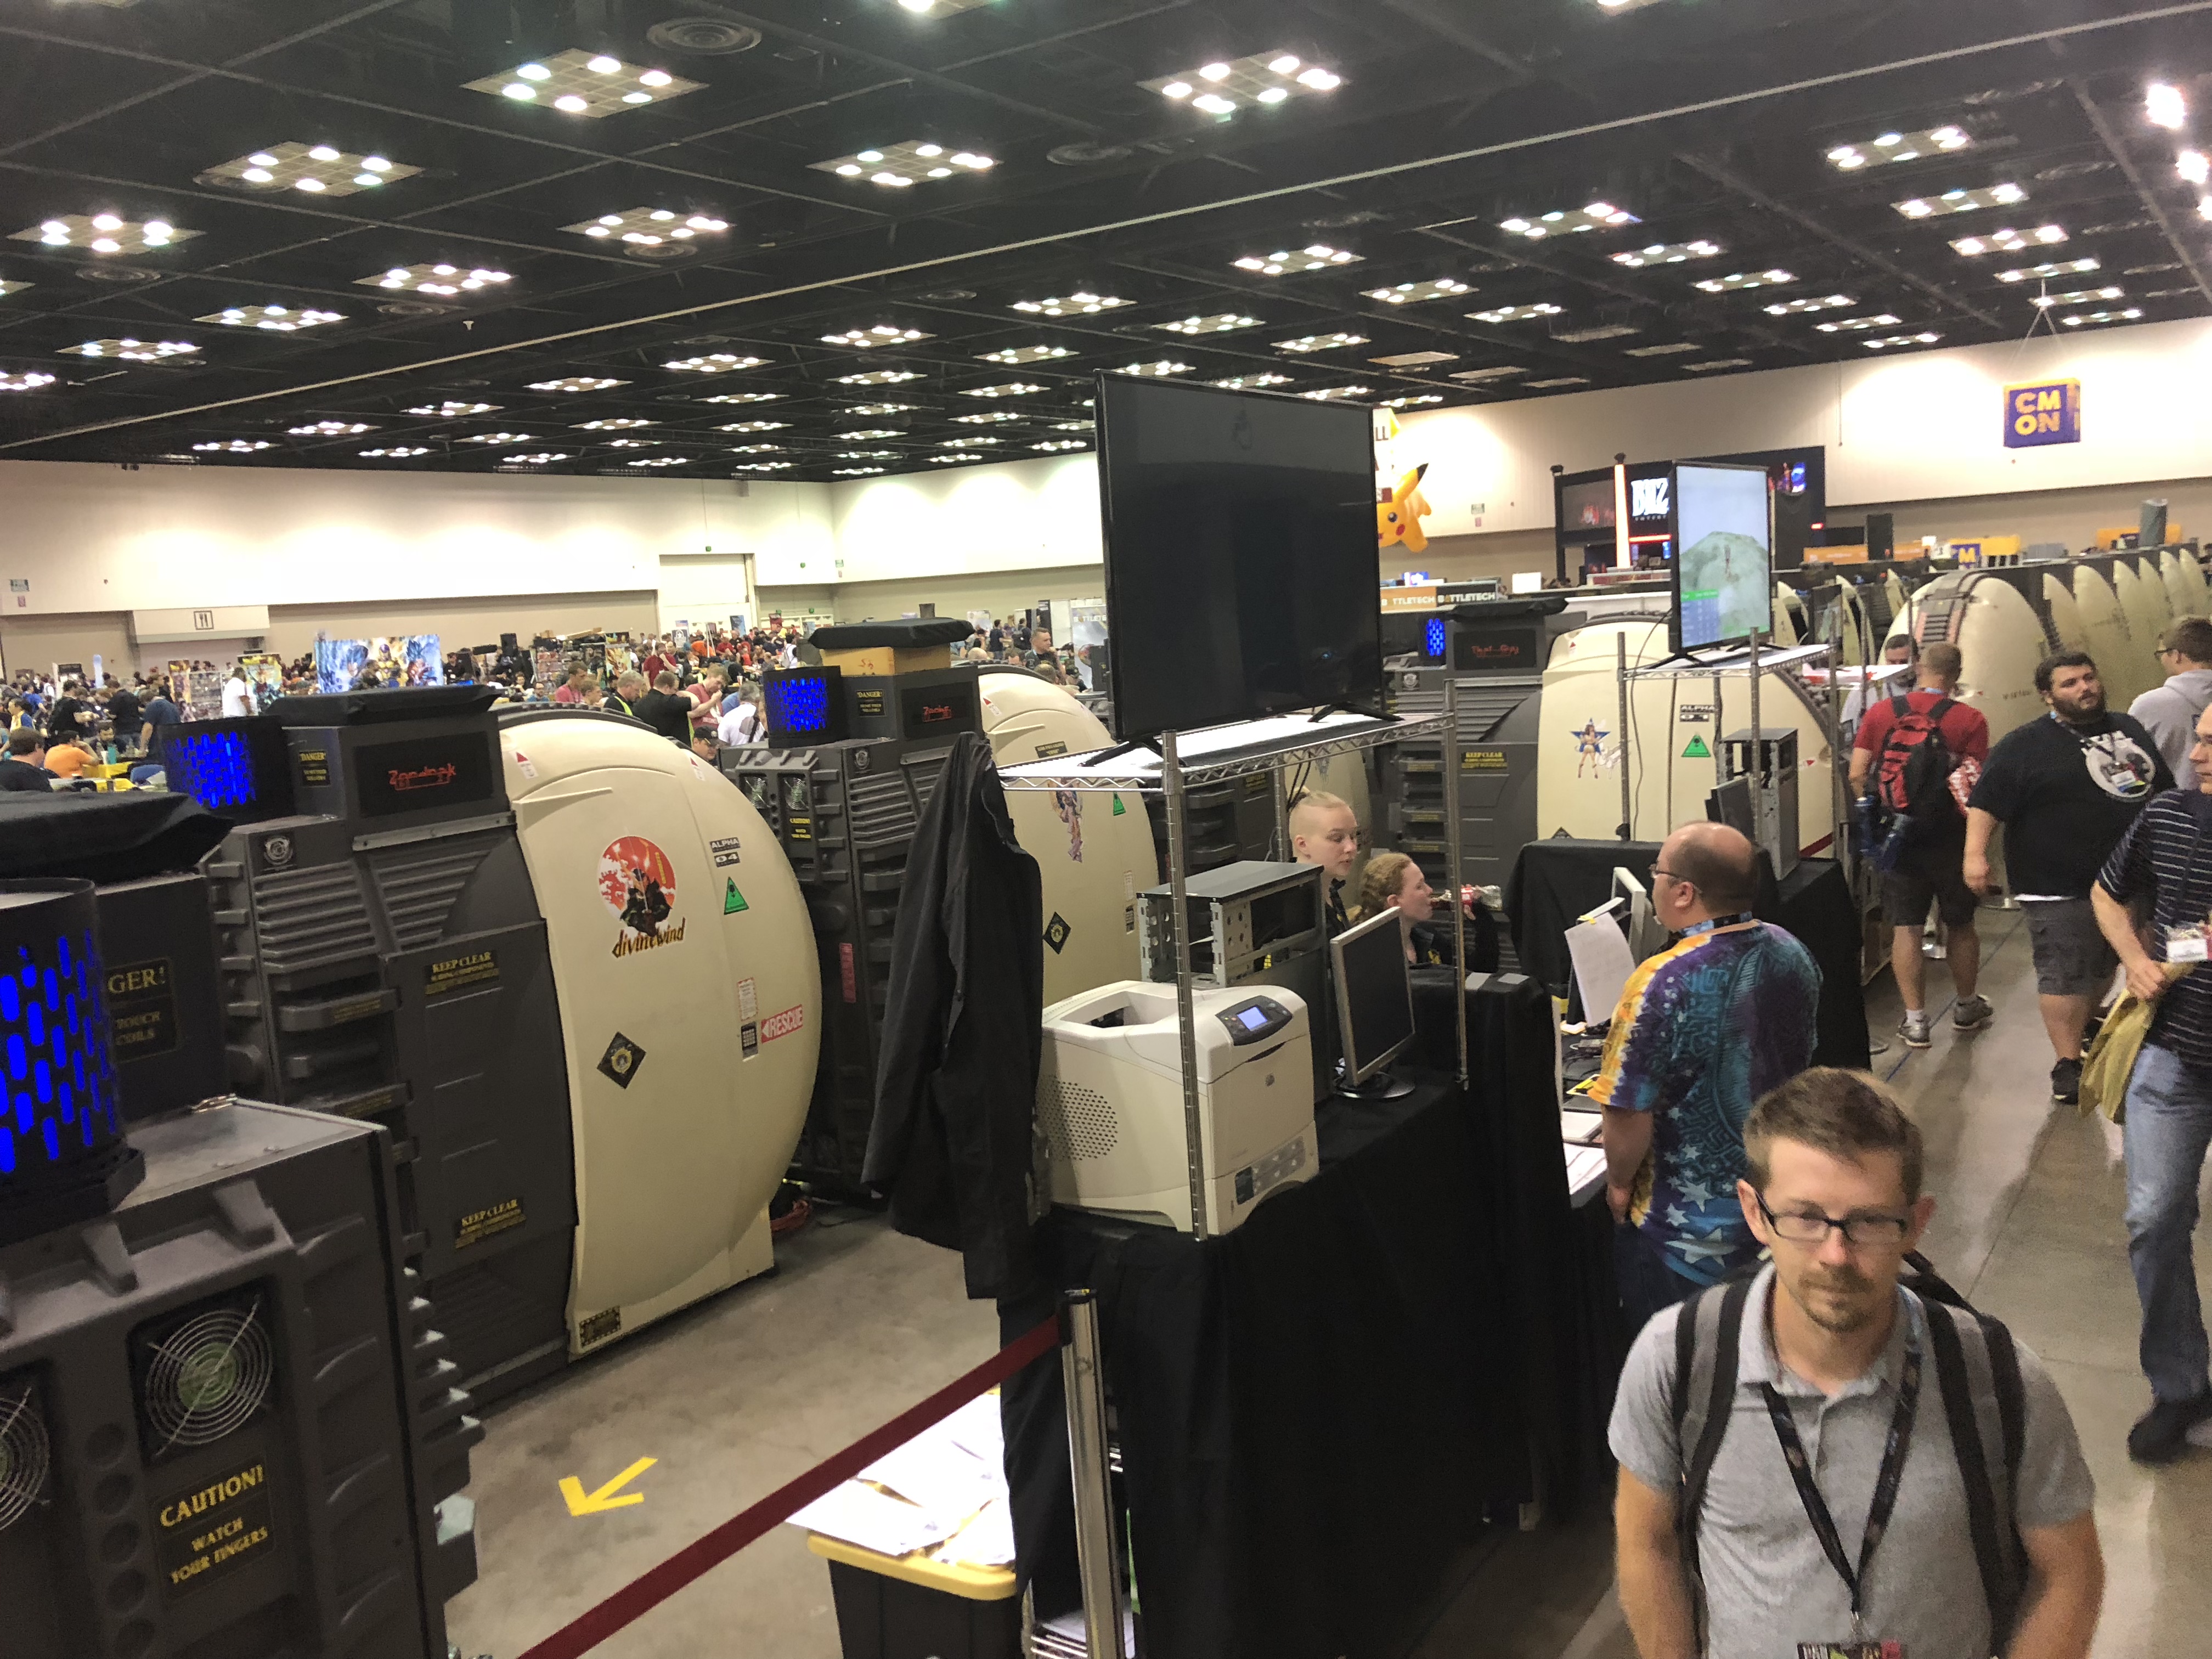 21 pods sighted at GenCon Indy